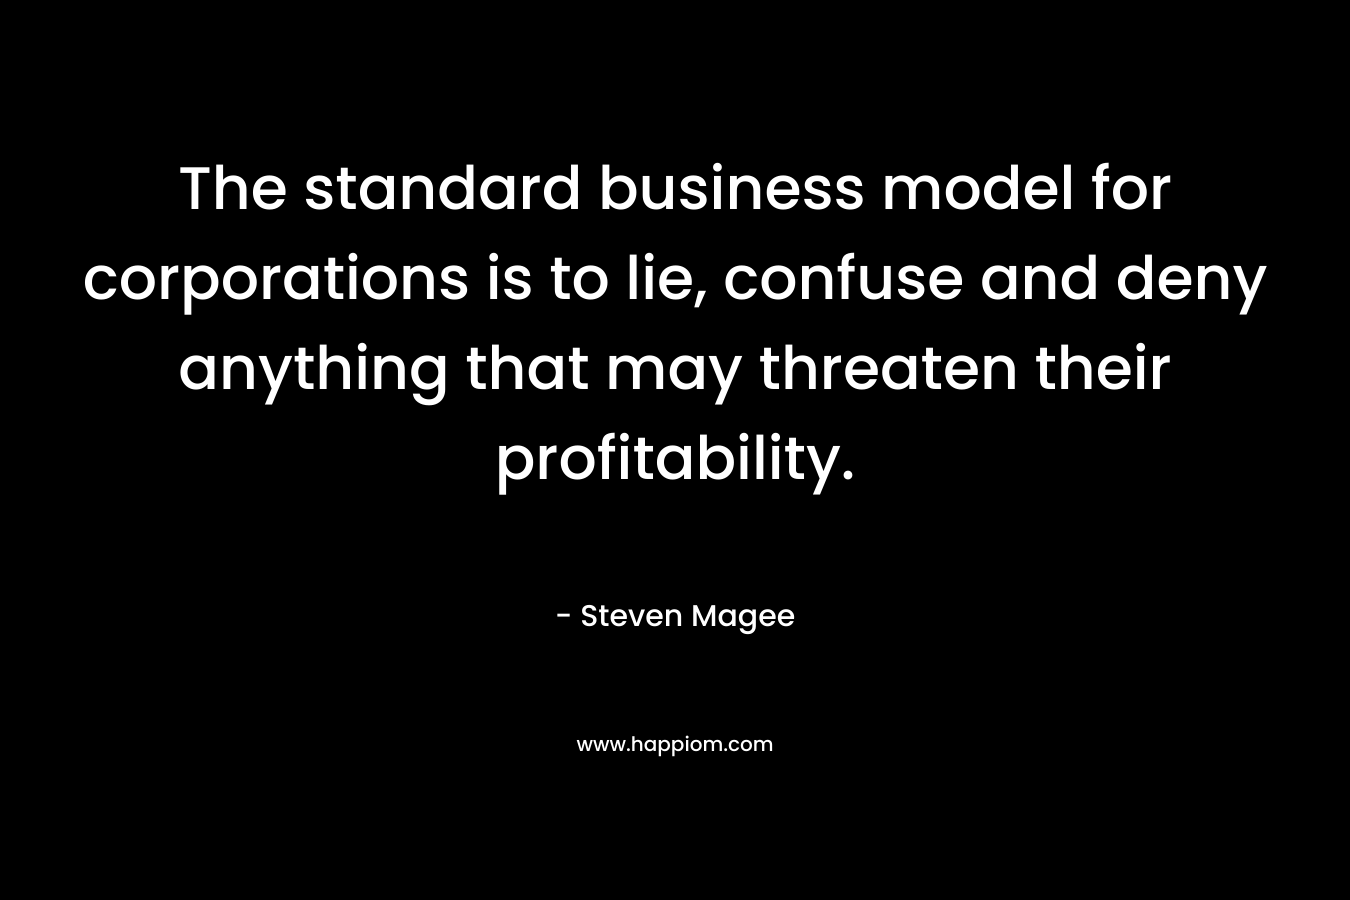 The standard business model for corporations is to lie, confuse and deny anything that may threaten their profitability. – Steven Magee